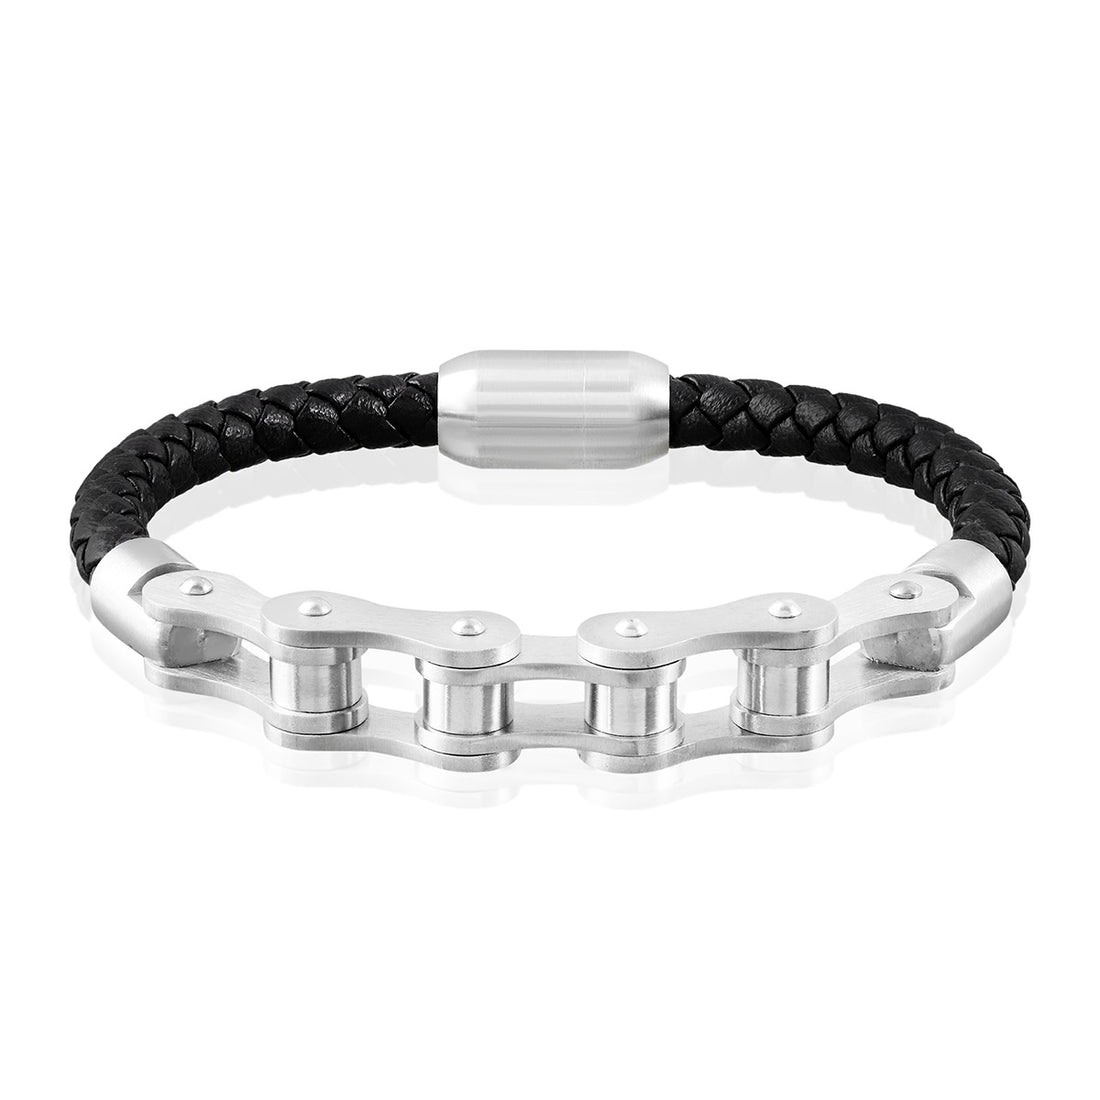 Wrist shot of the bracelet elegantly styled with a casual outfit, adding a touch of sophistication to the look